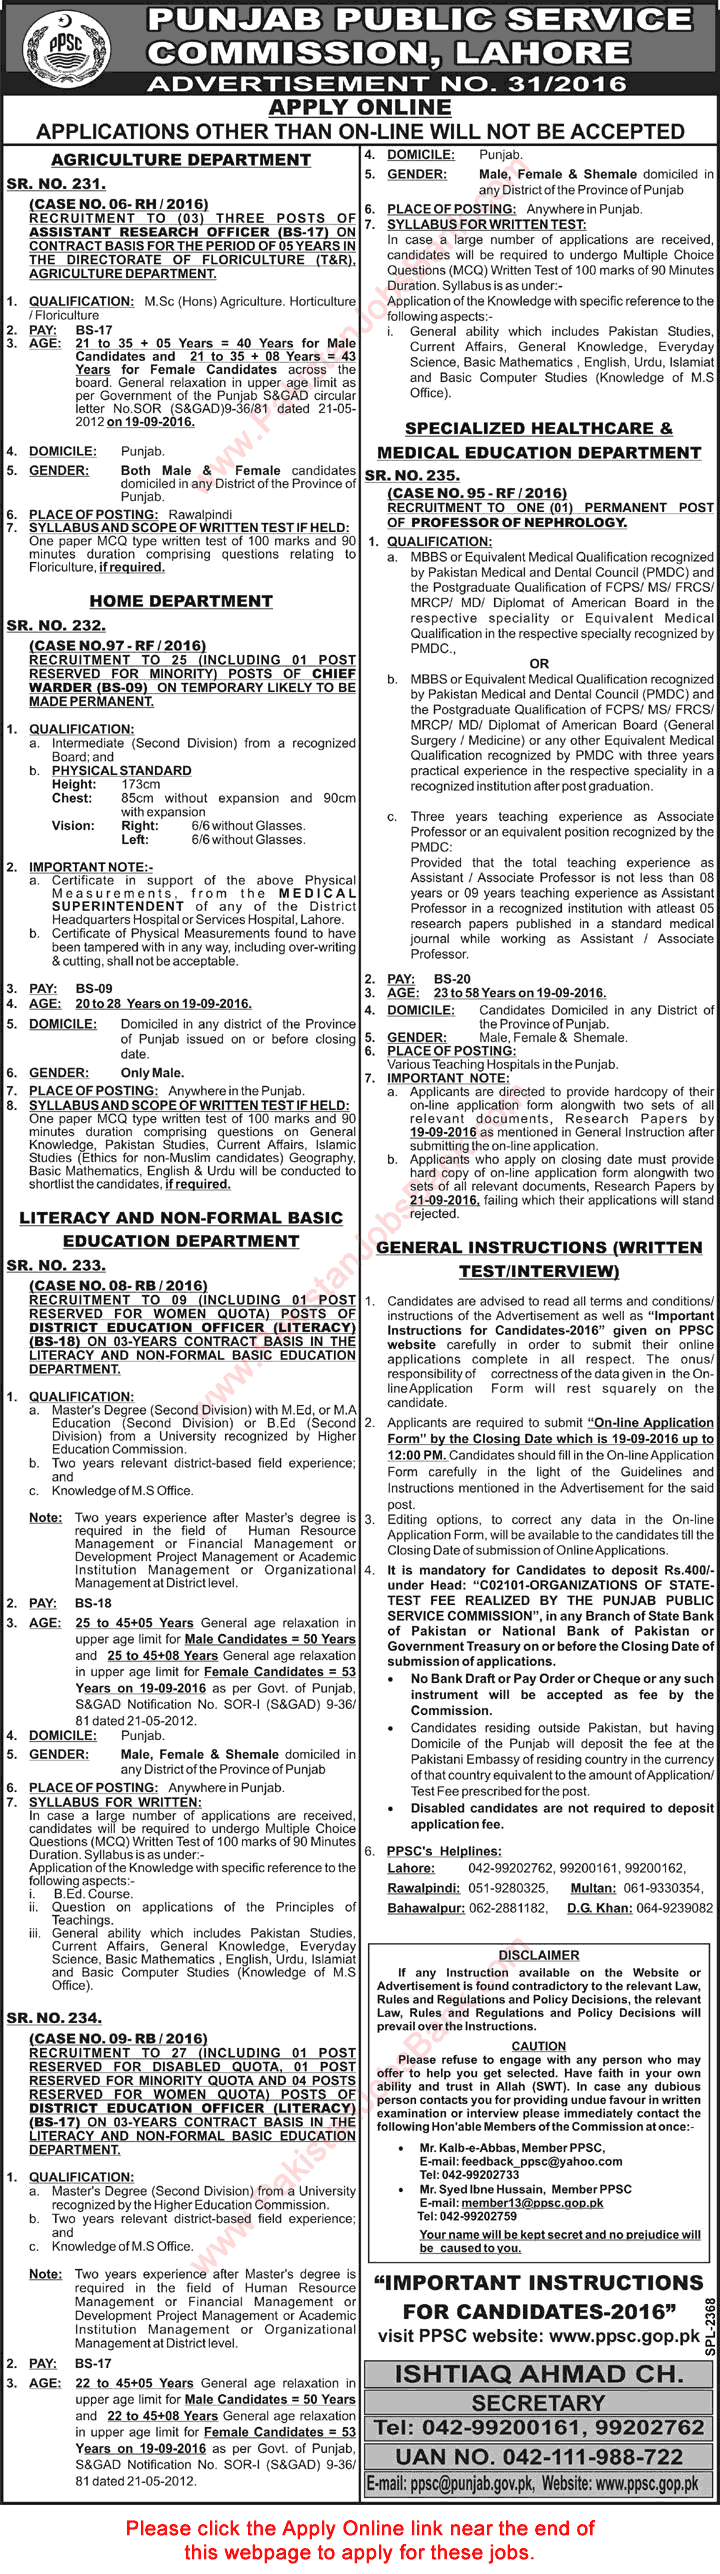 PPSC Jobs September 2016 Consolidated Advertisement No 31/2016 Apply Online Latest